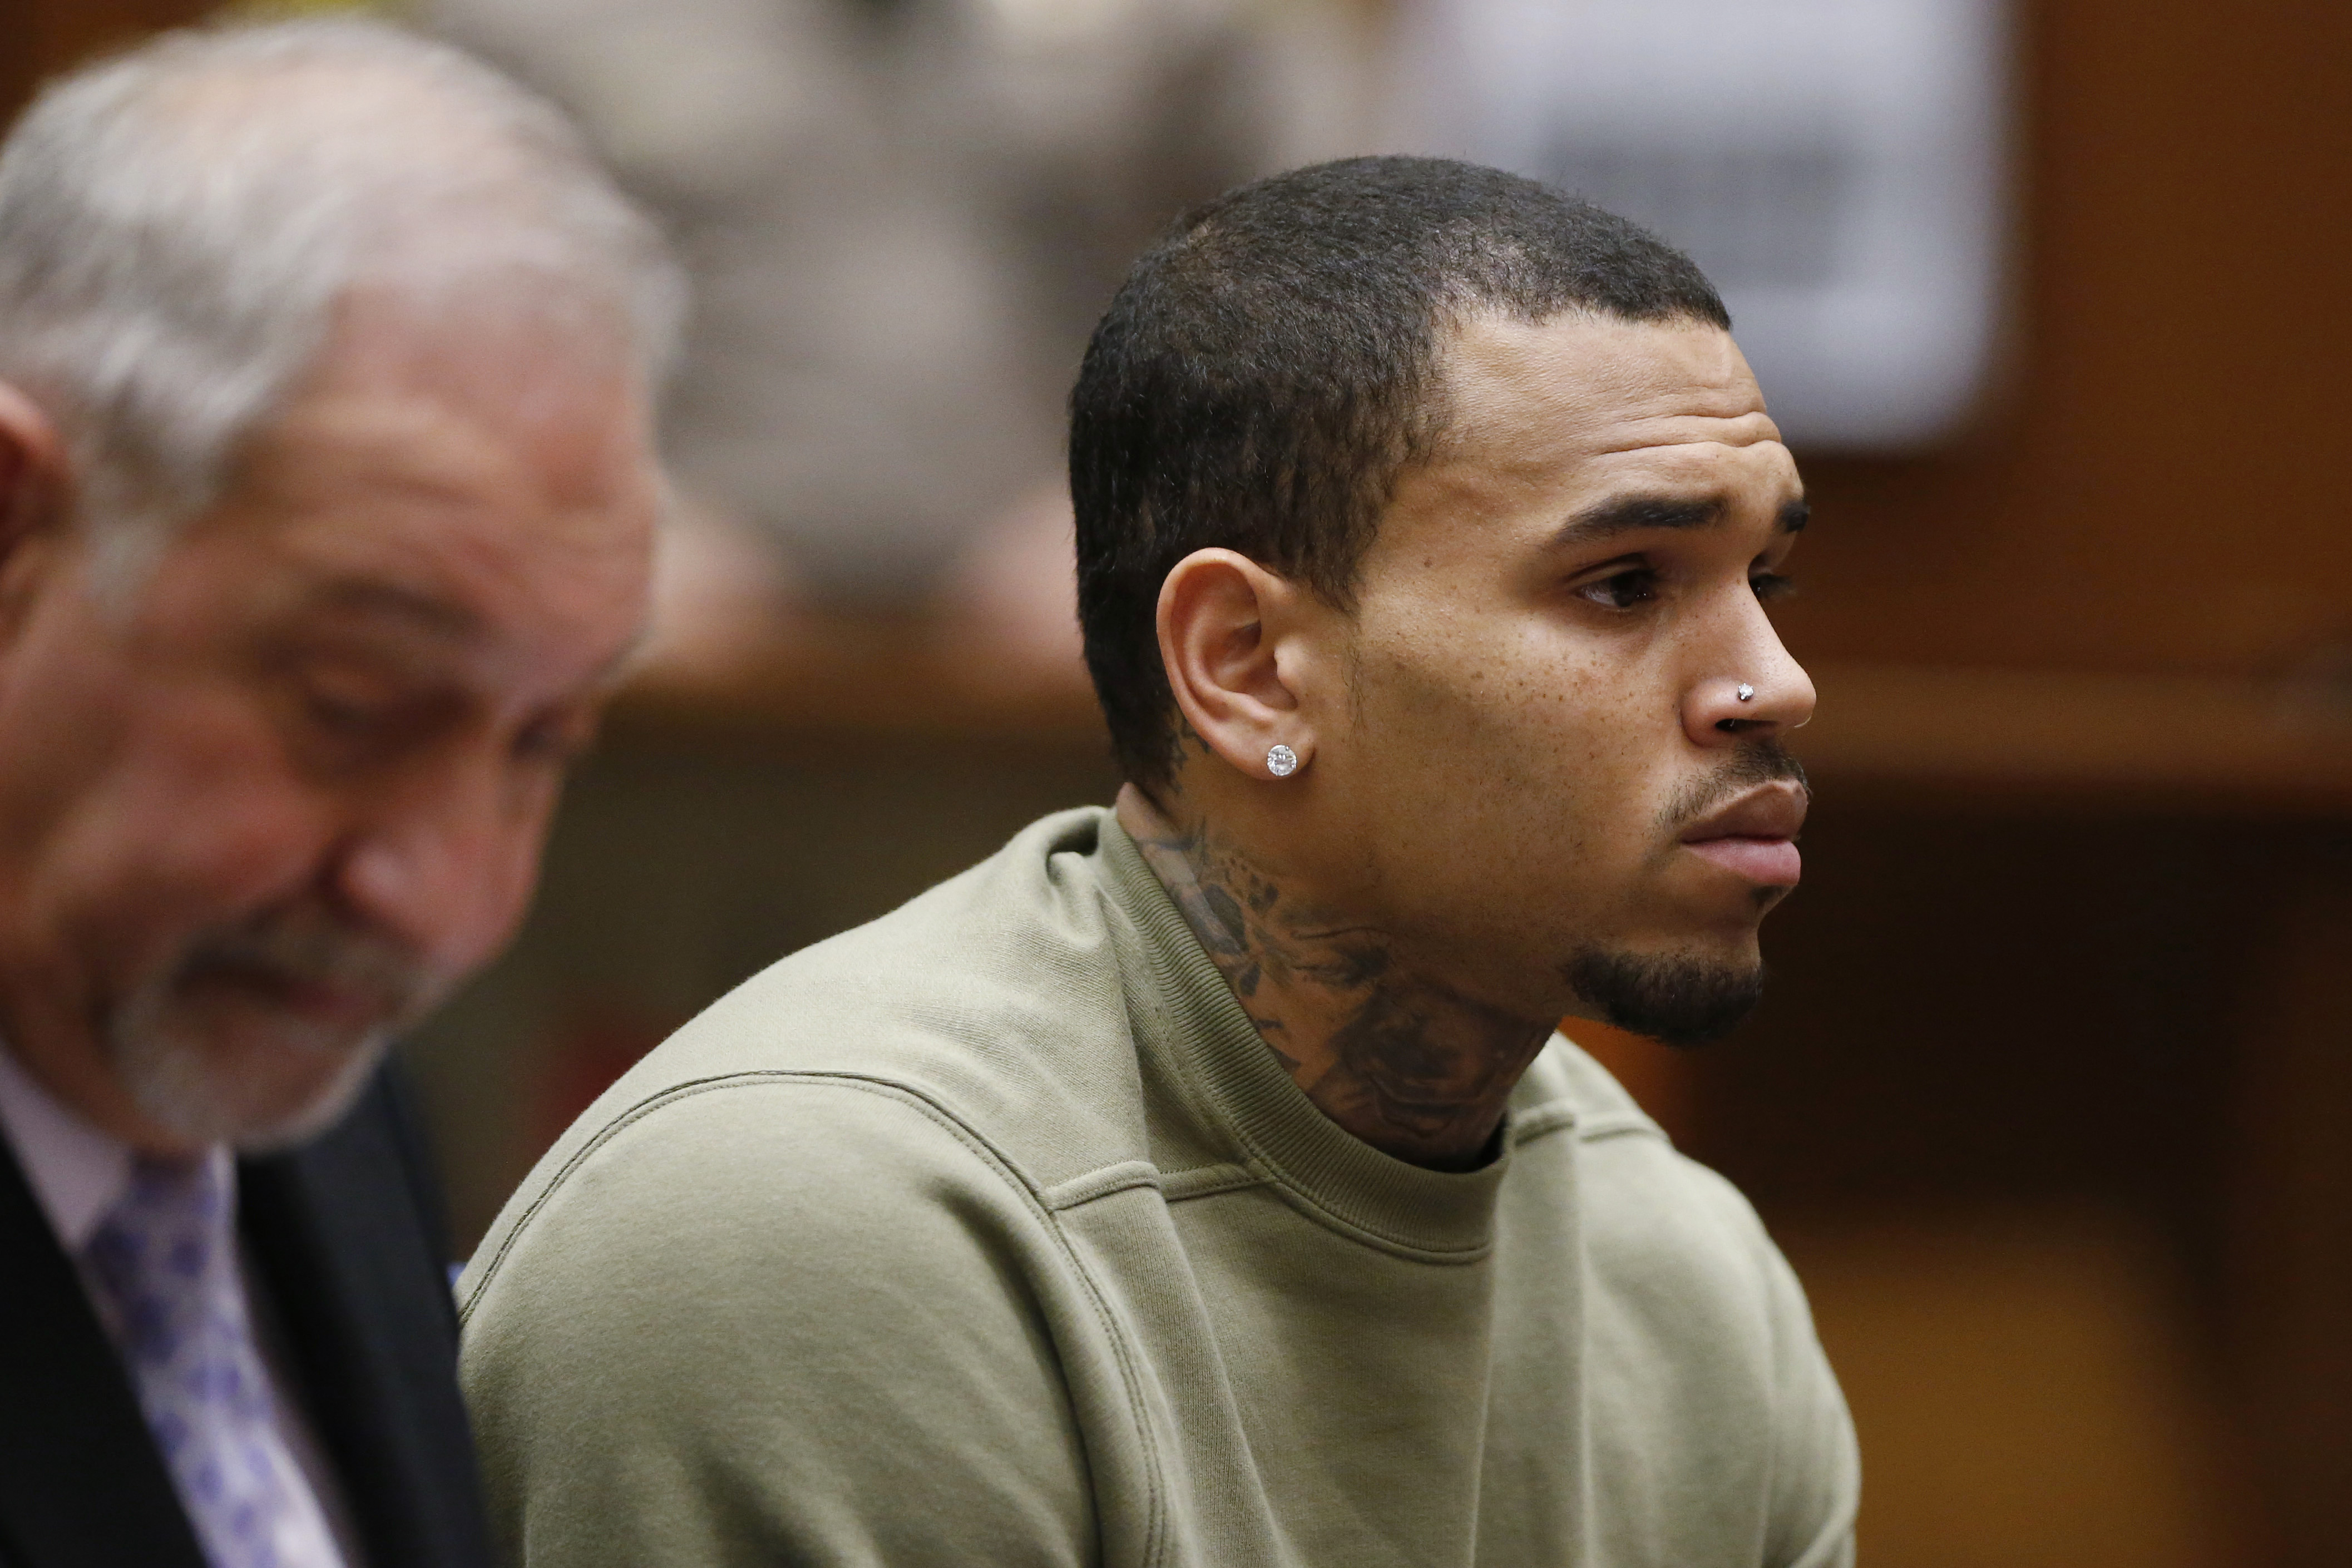 Singer Chris Brown, who pleaded guilty to assaulting his girlfriend Rihanna, appears in court with his lawyer Mark Geragos for a progress hearing, in Los Angeles